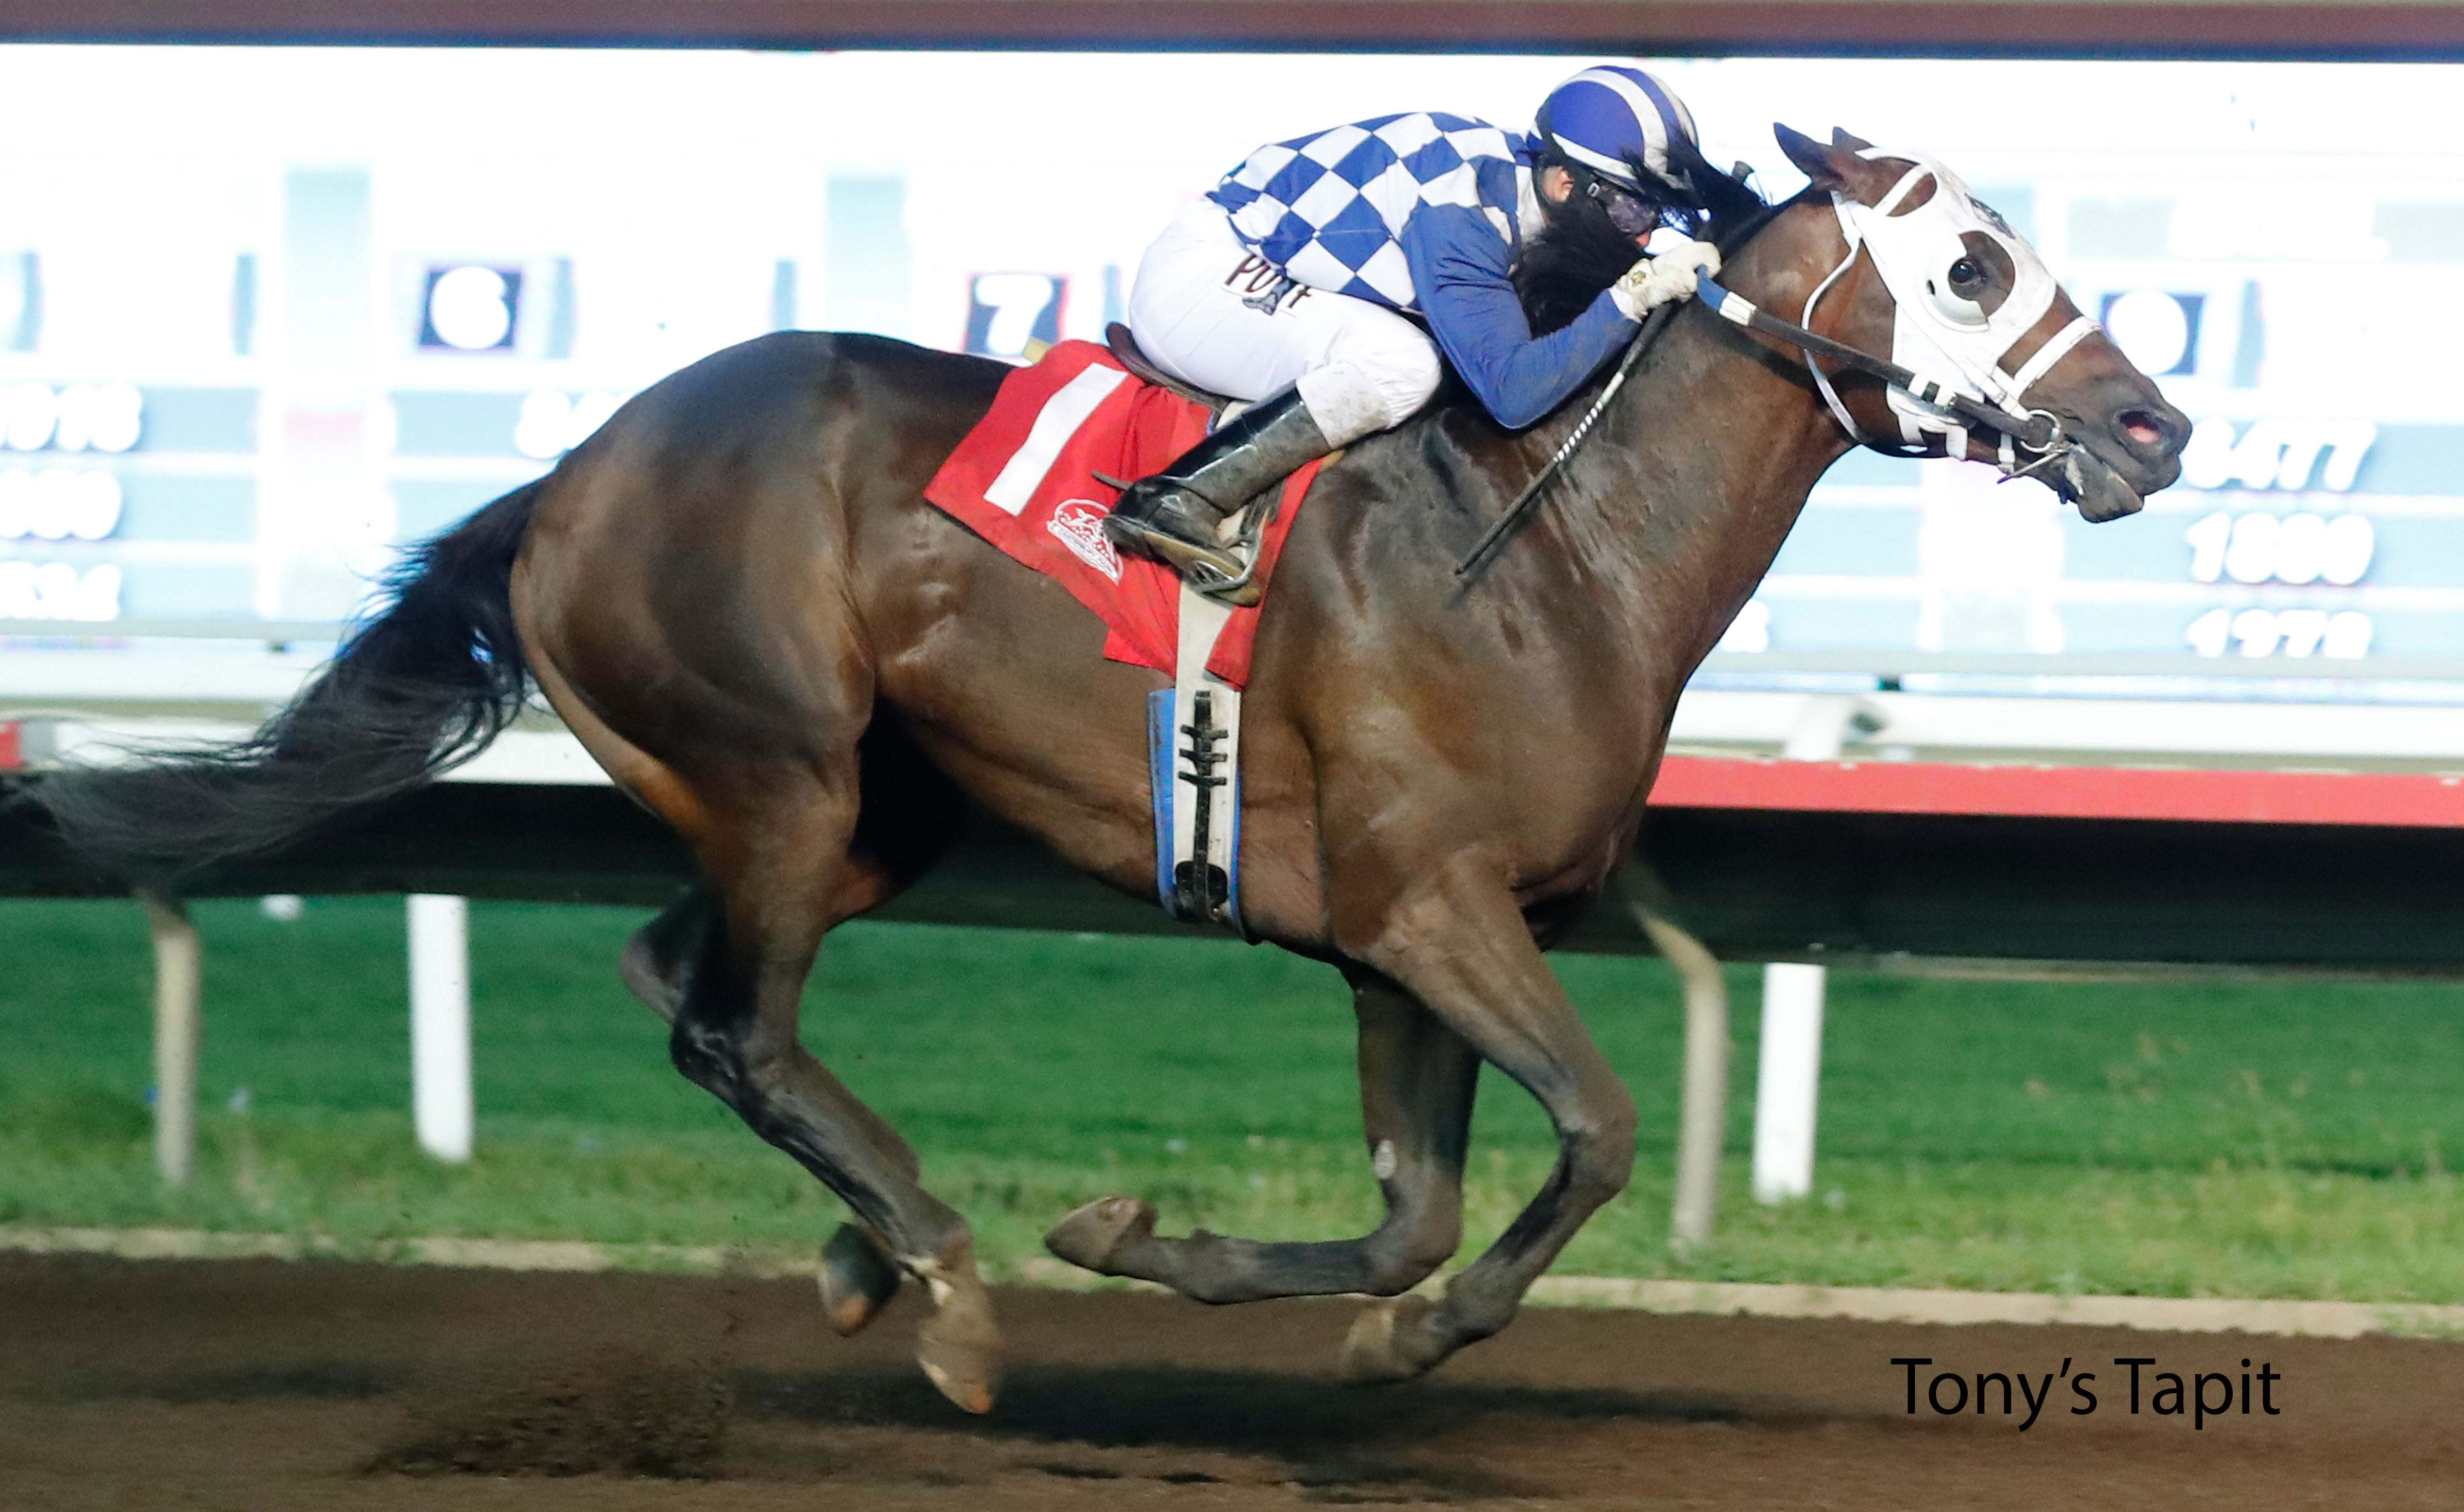 Racing image of Tony's Tapit